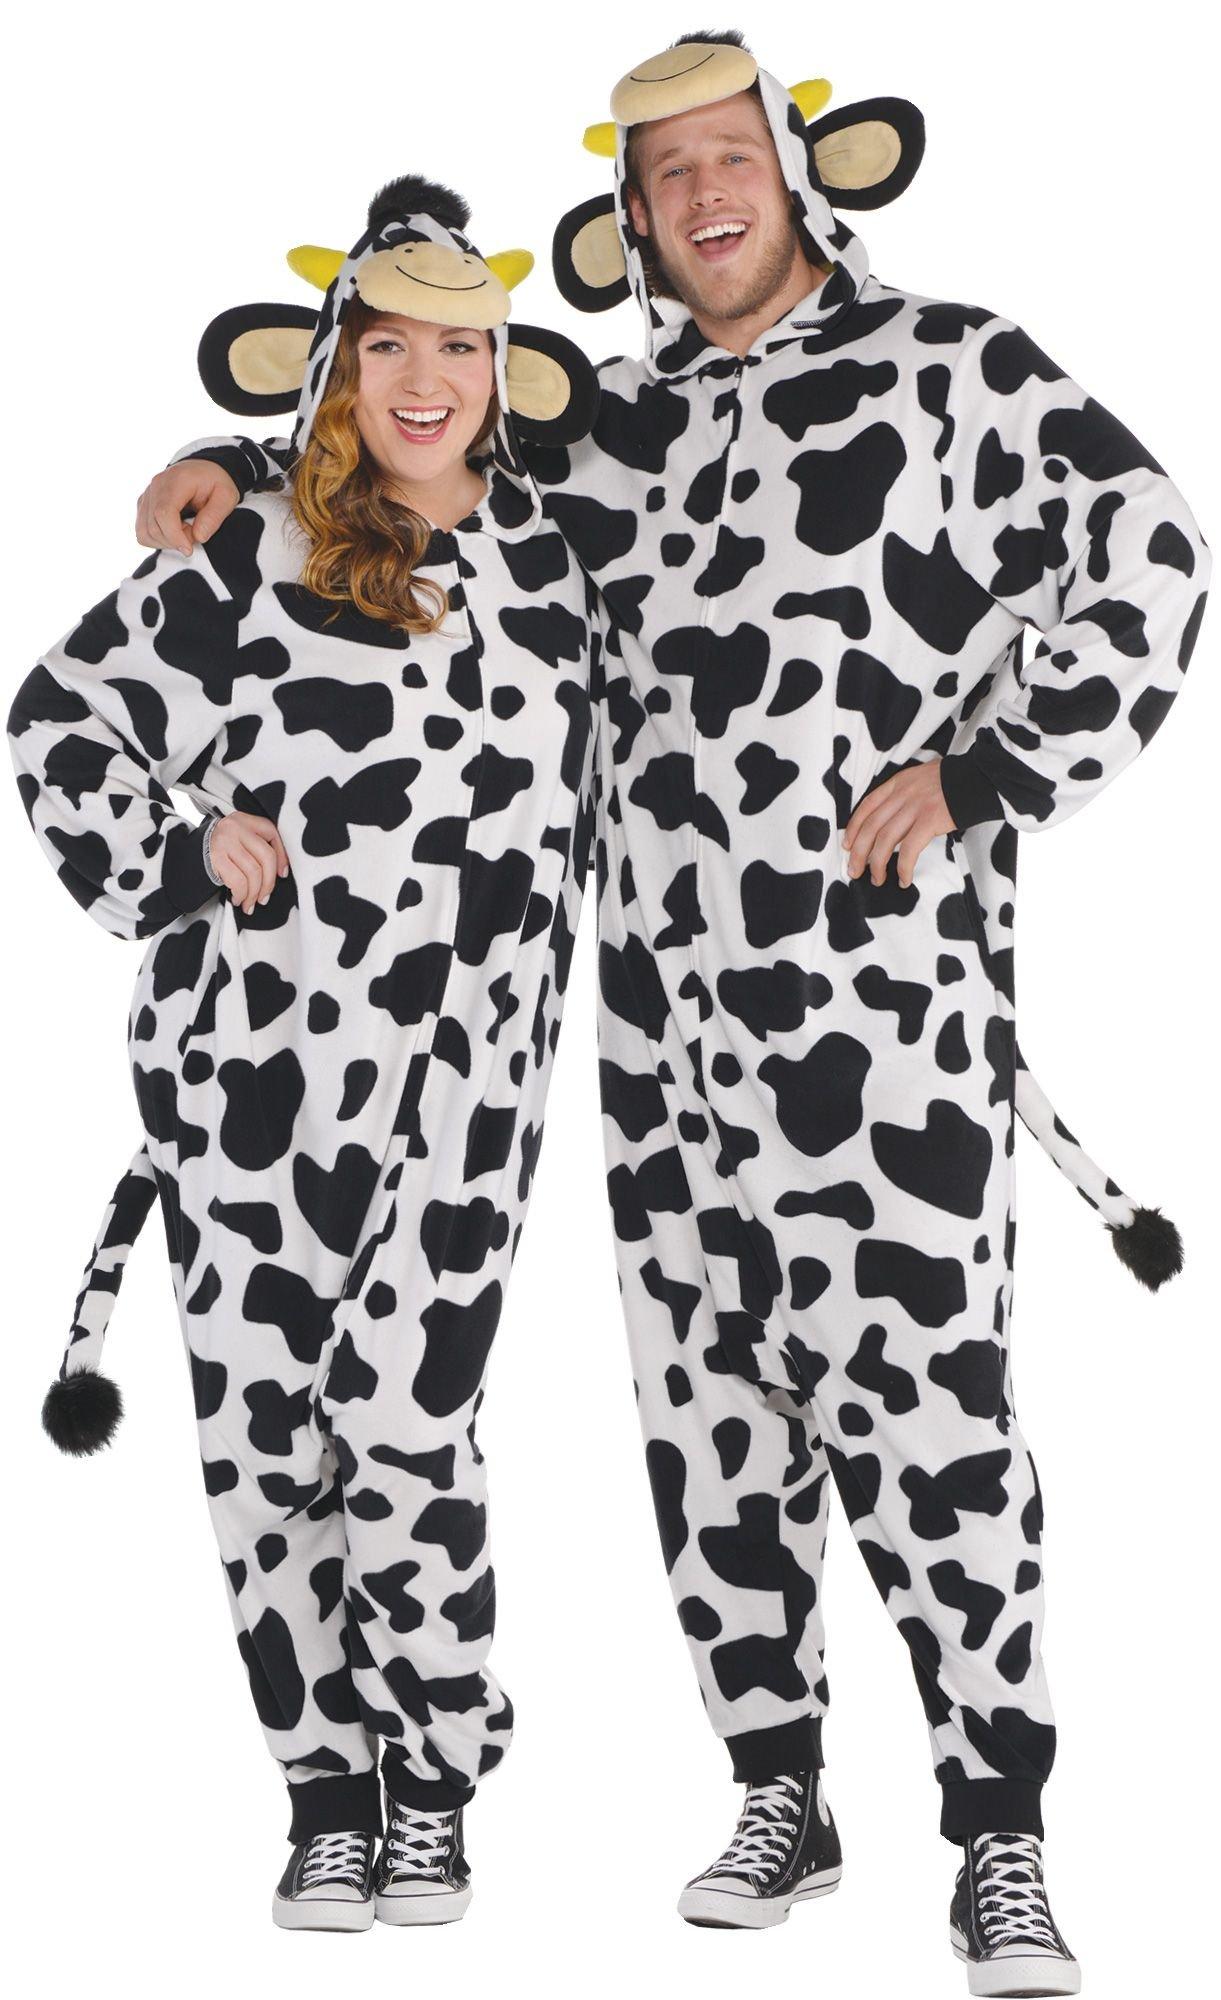 Adult Zipster Cow One Piece Costume Plus Size